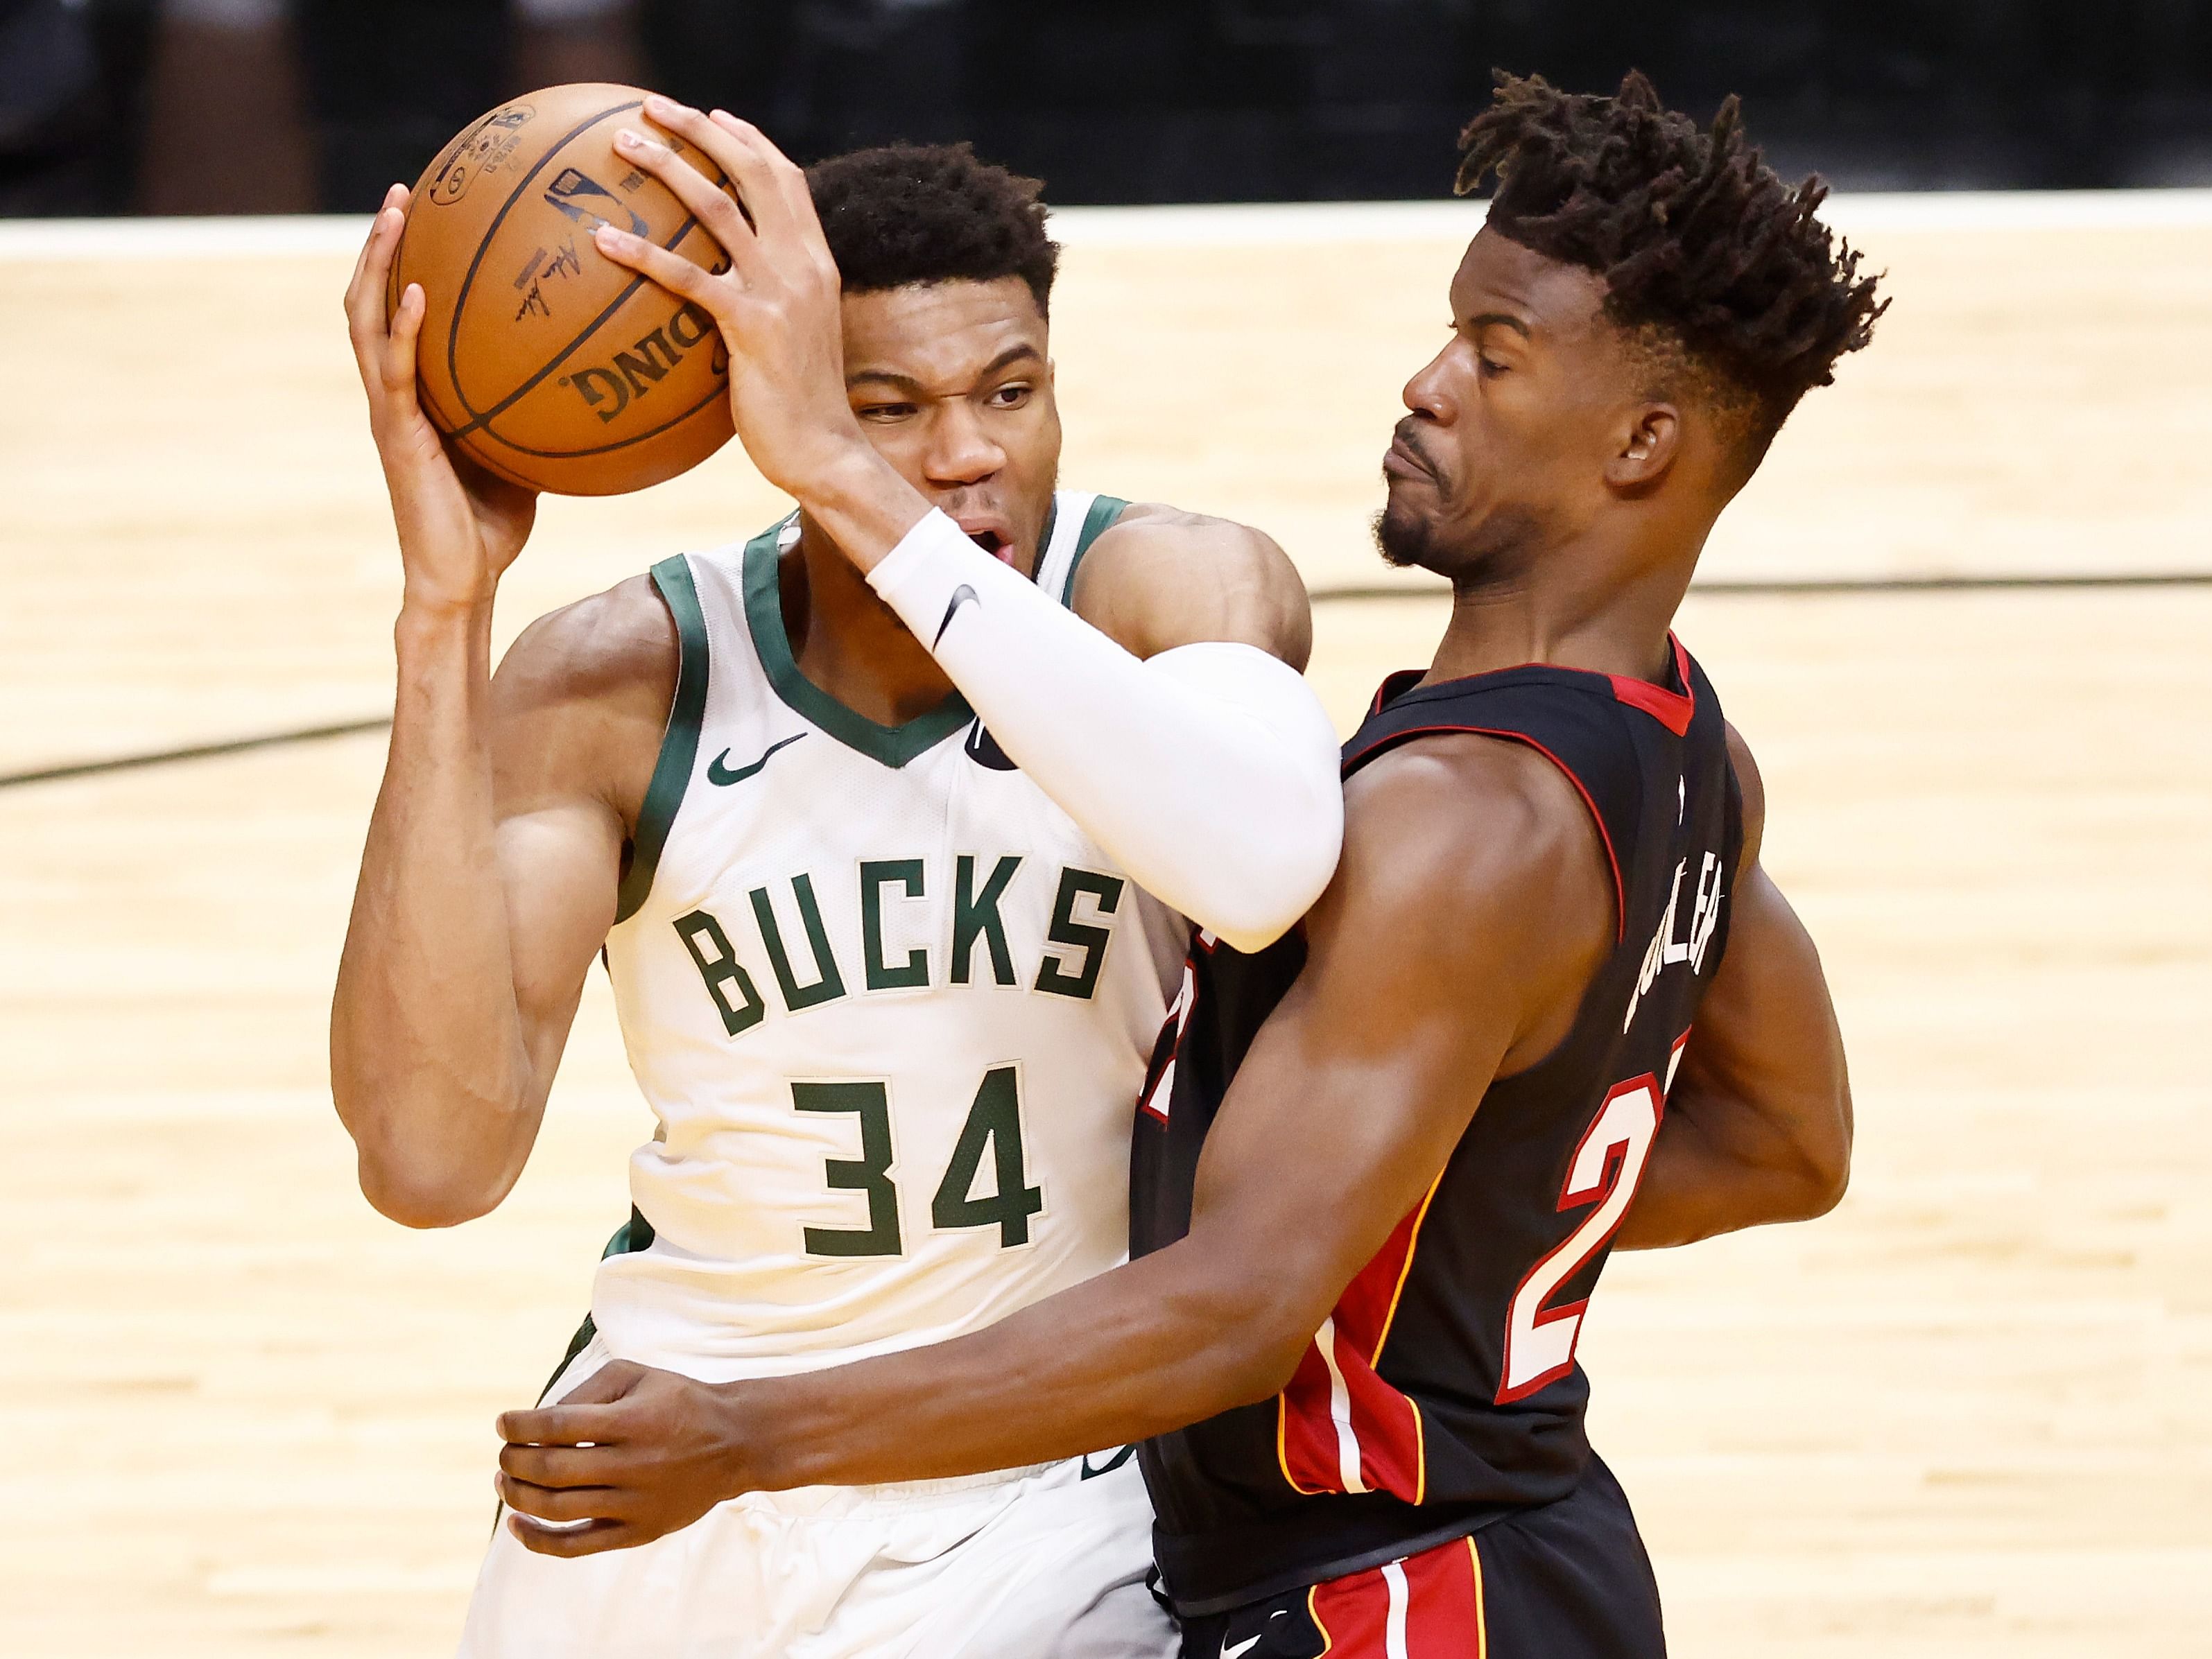 Bucks vs. Heat record this season, odds, rosters, and more ahead of